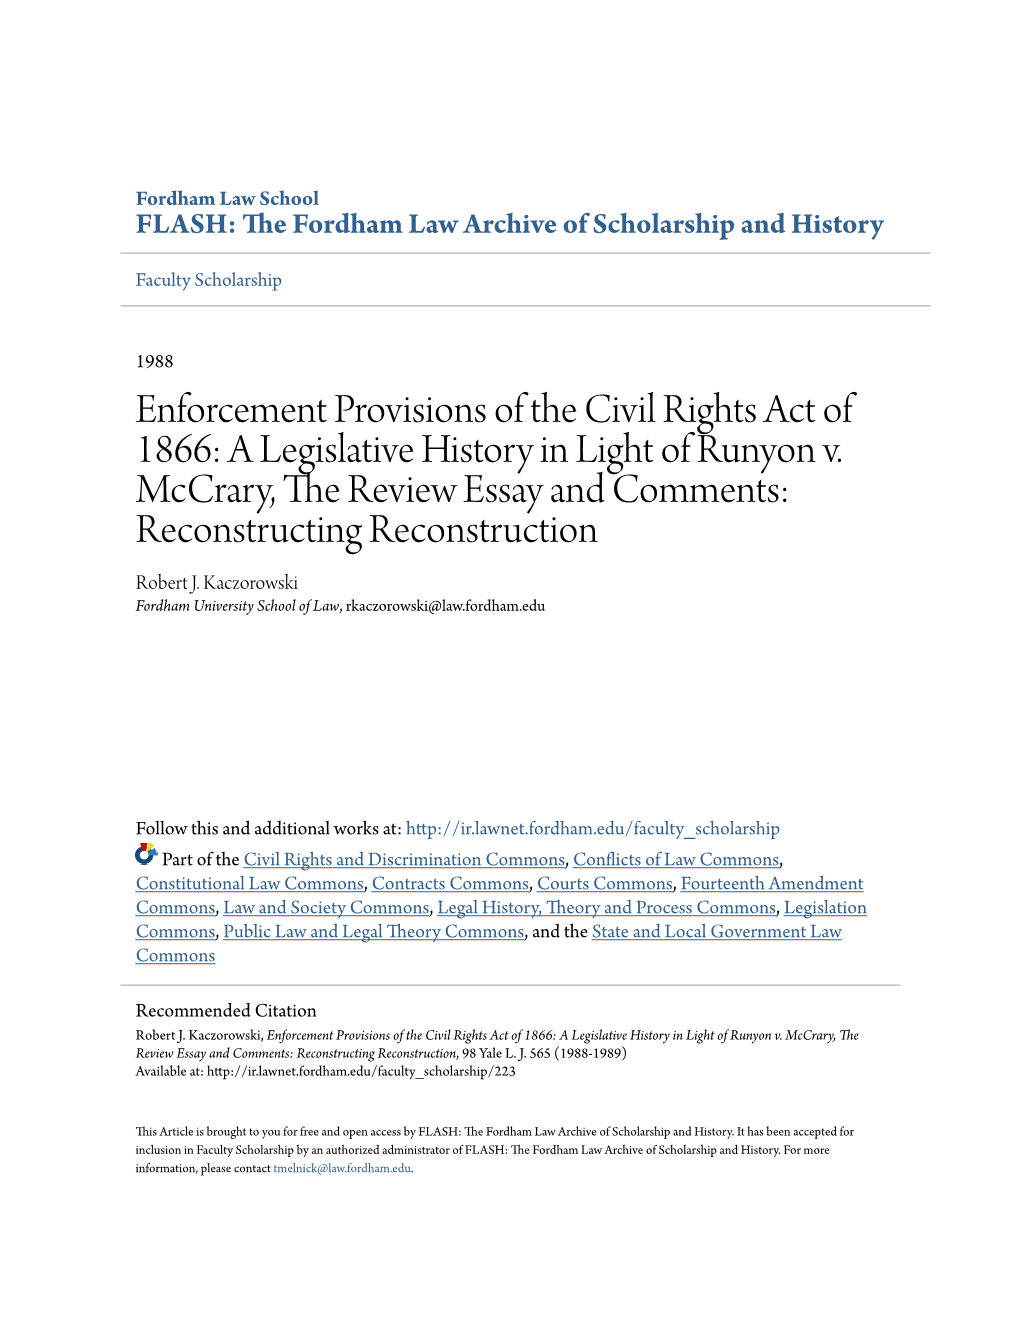 Enforcement Provisions of the Civil Rights Act of 1866: a Legislative History in Light of Runyon V. Mccrary, the Review Essay An